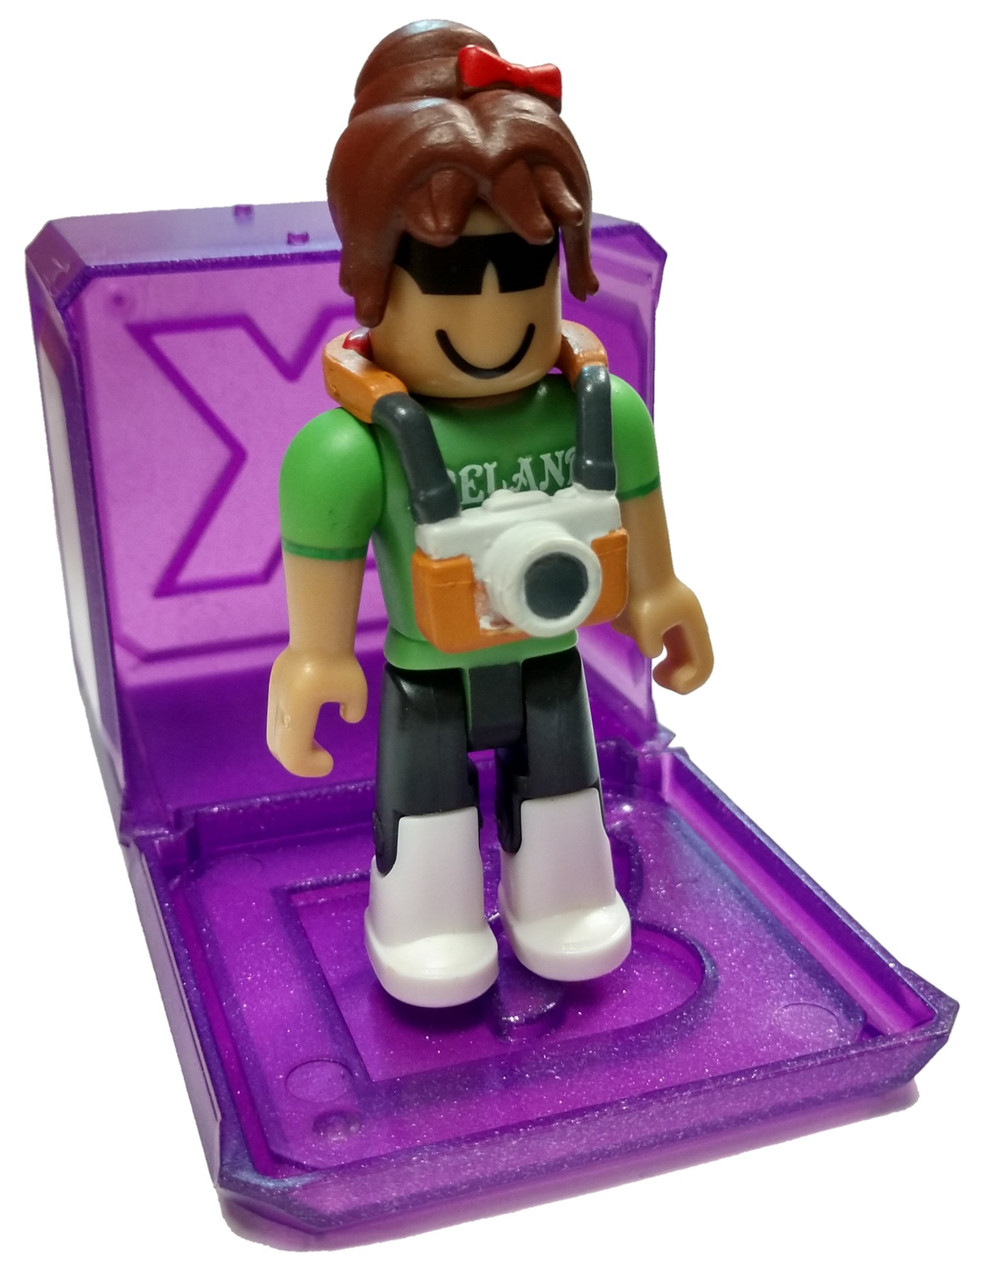 Roblox Celebrity Collection Series 3 World Expedition Ireland Itinerant 3 Mini Figure With Cube And Online Code Loose Jazwares Toywiz - spy pen roblox